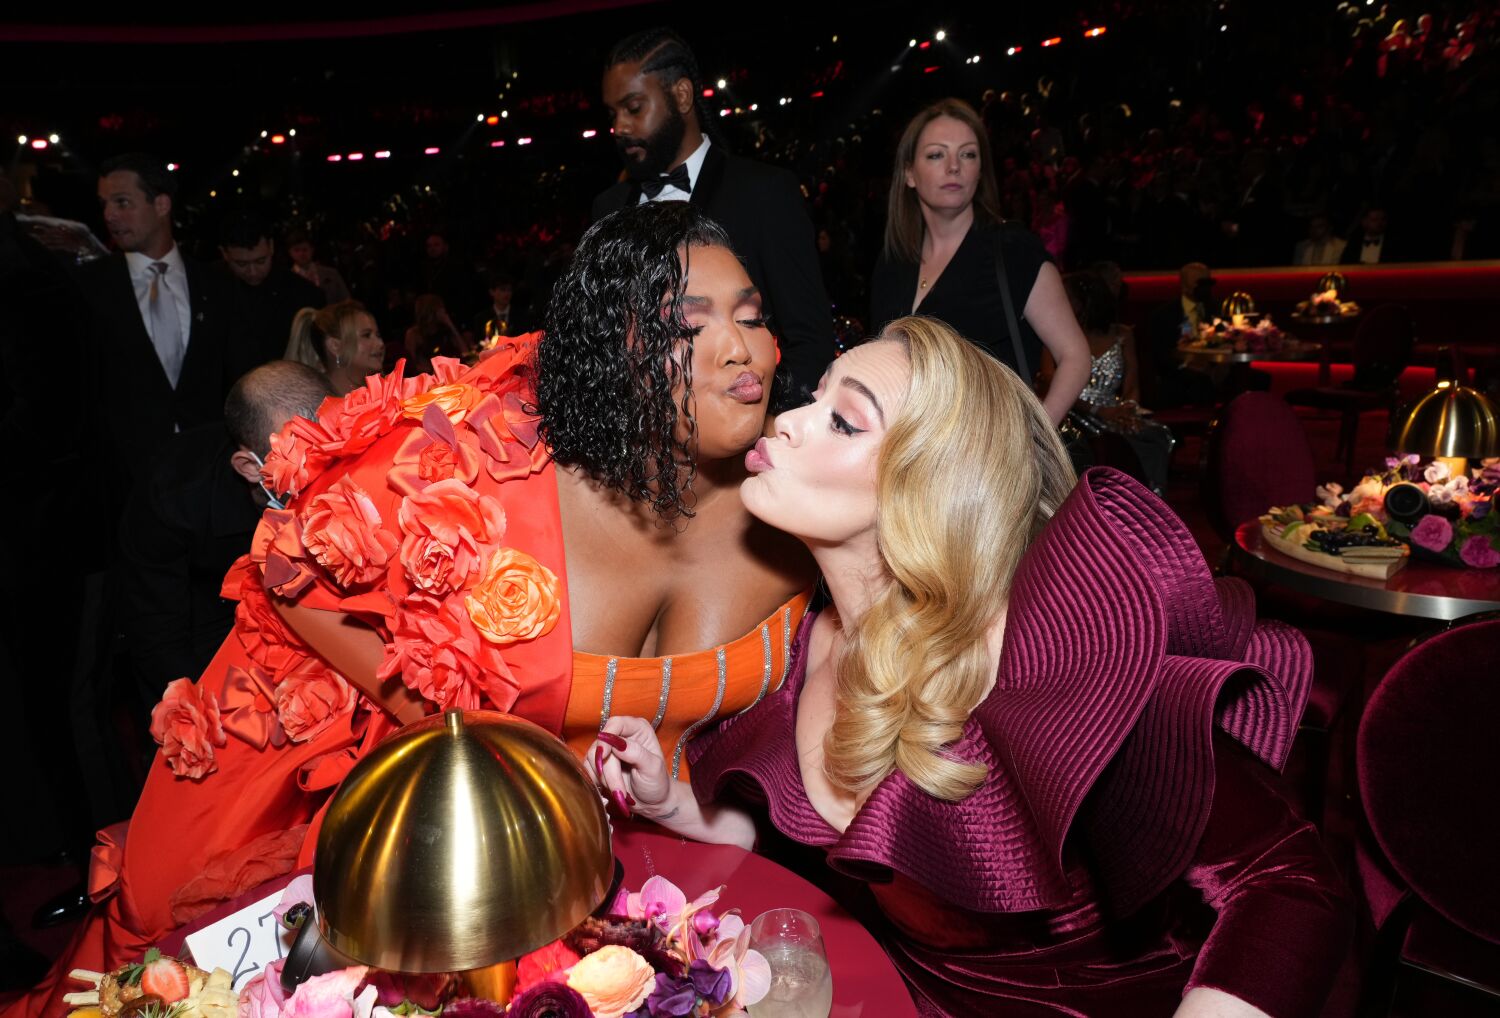 Go easy on ... booze? Lizzo and Adele got 'so drunk' they lost track of the Grammys